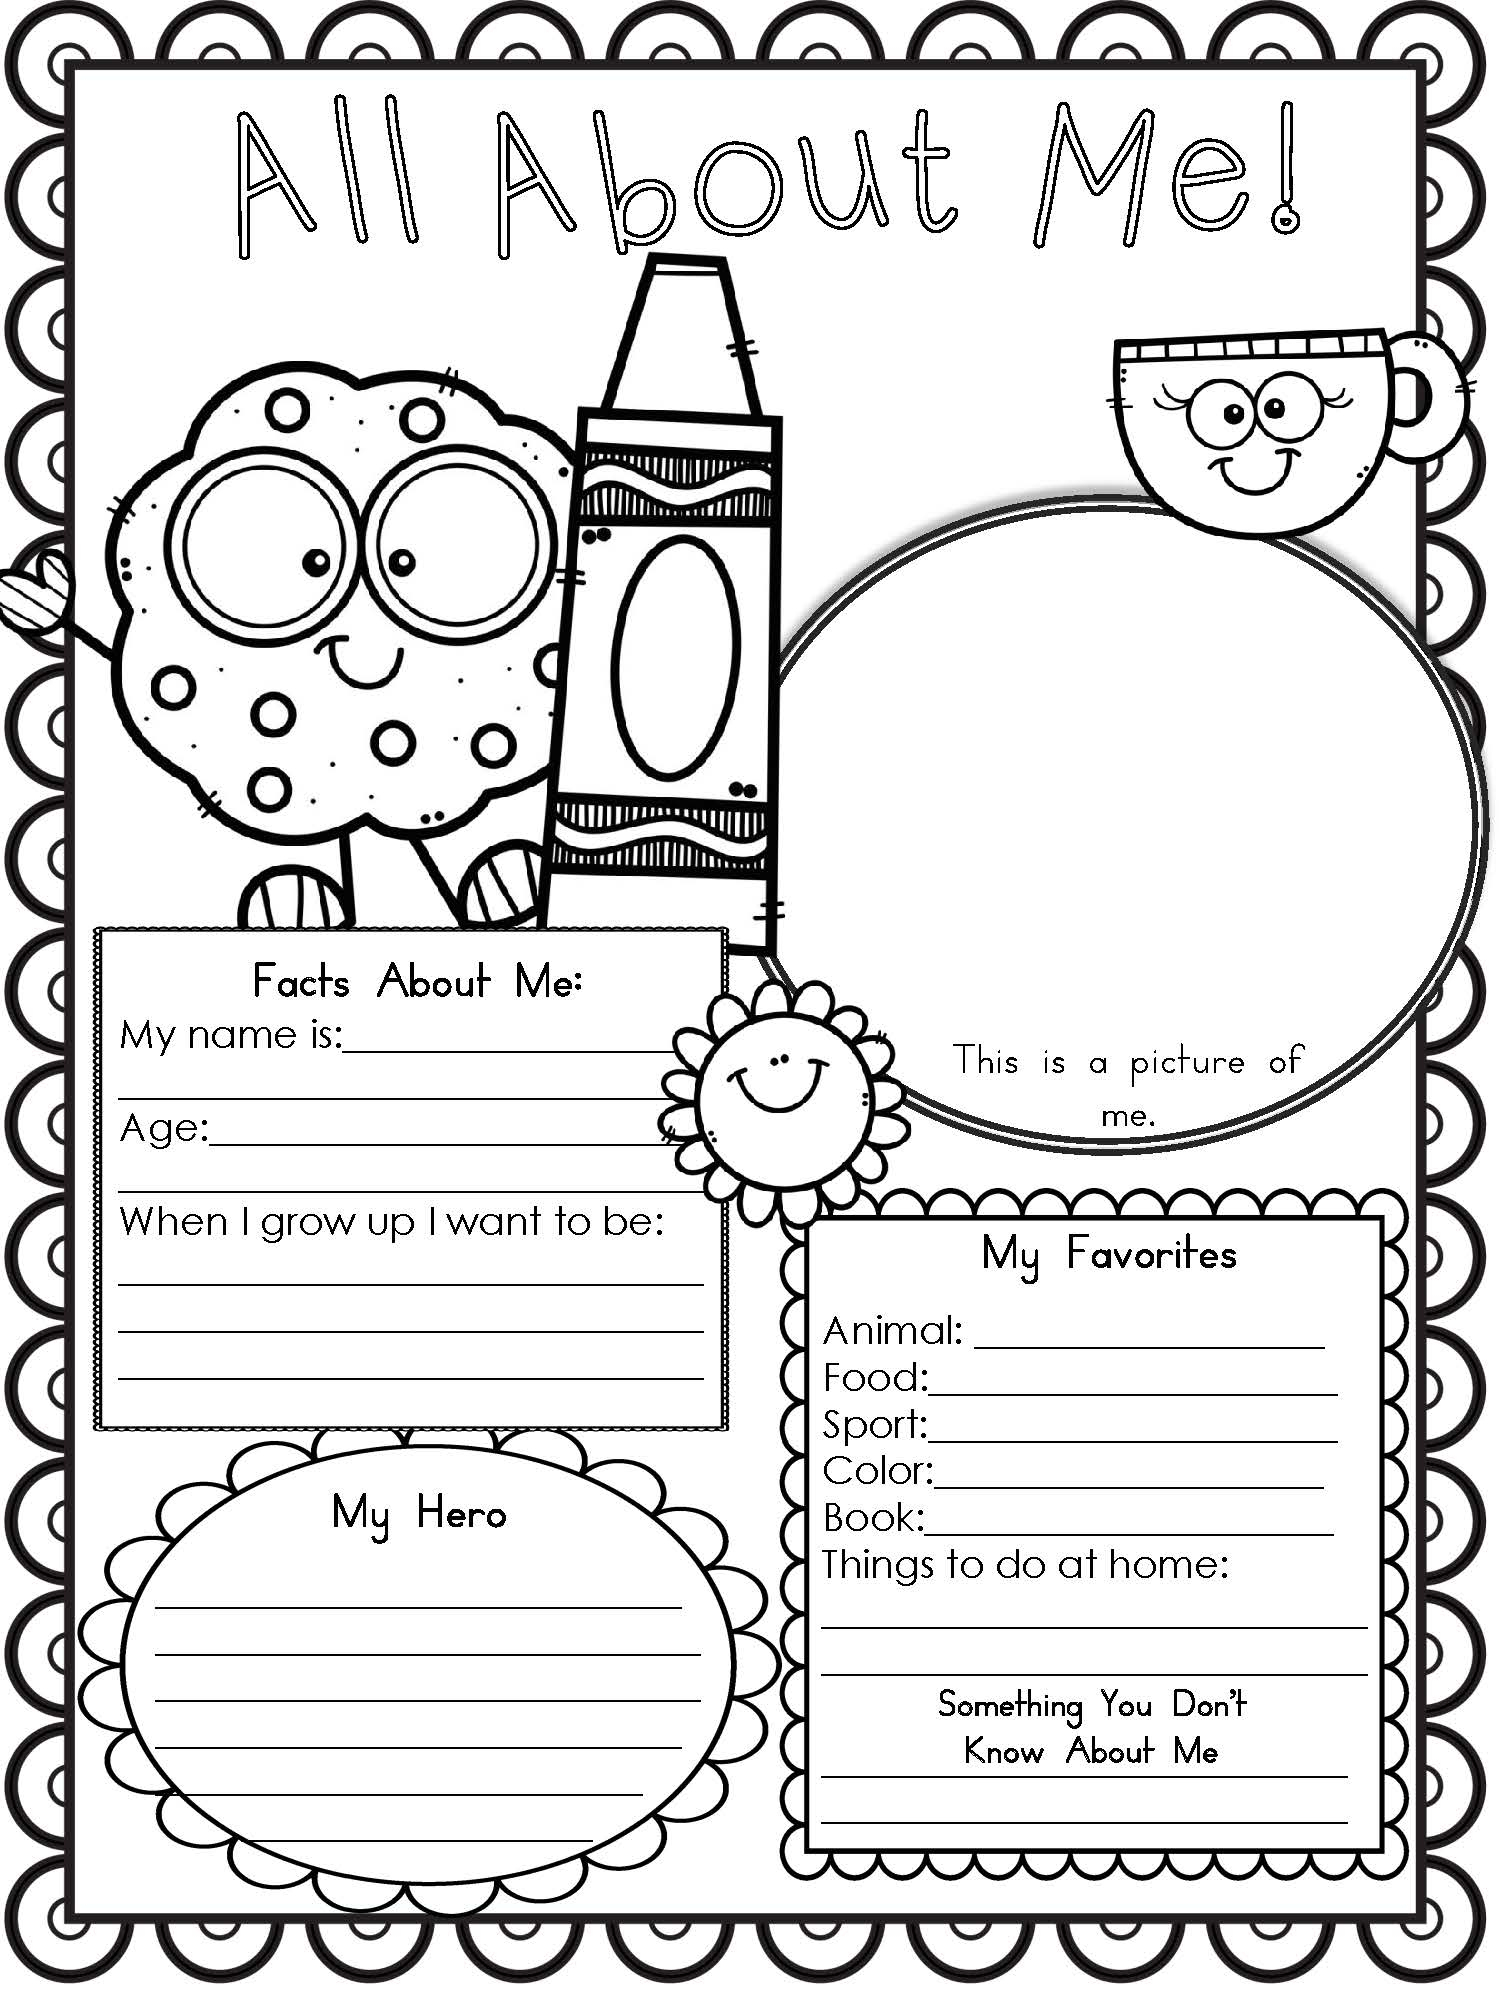 Free Printable All About Me Worksheet - Modern Homeschool Family | All About Me Printable Worksheets